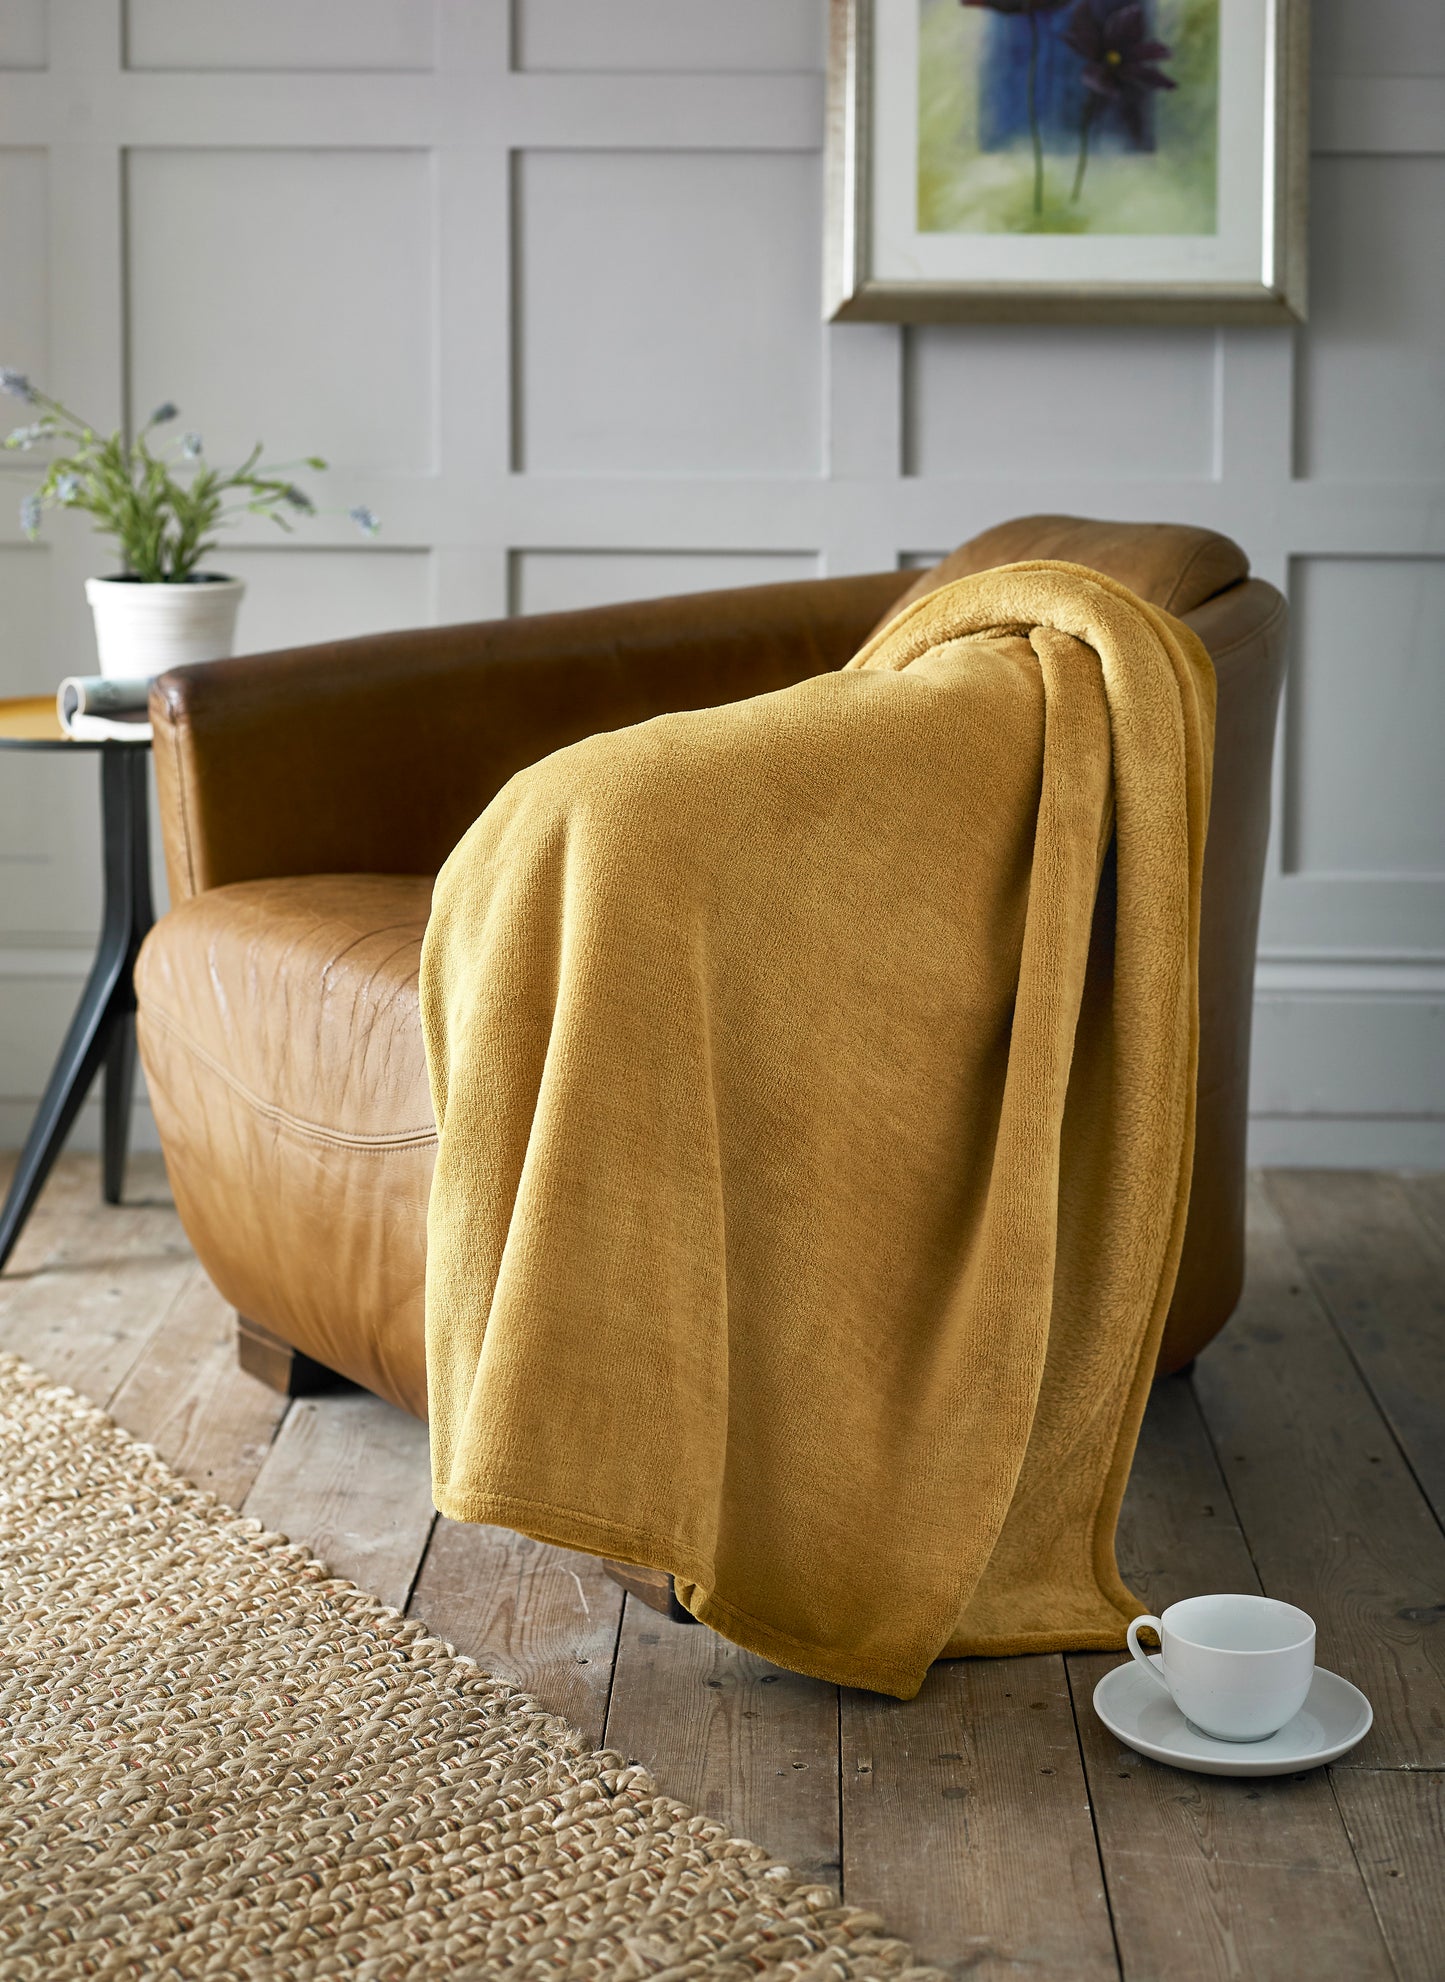 Extra Large Snuggletouch Supersoft Throw in Ochre Yellow